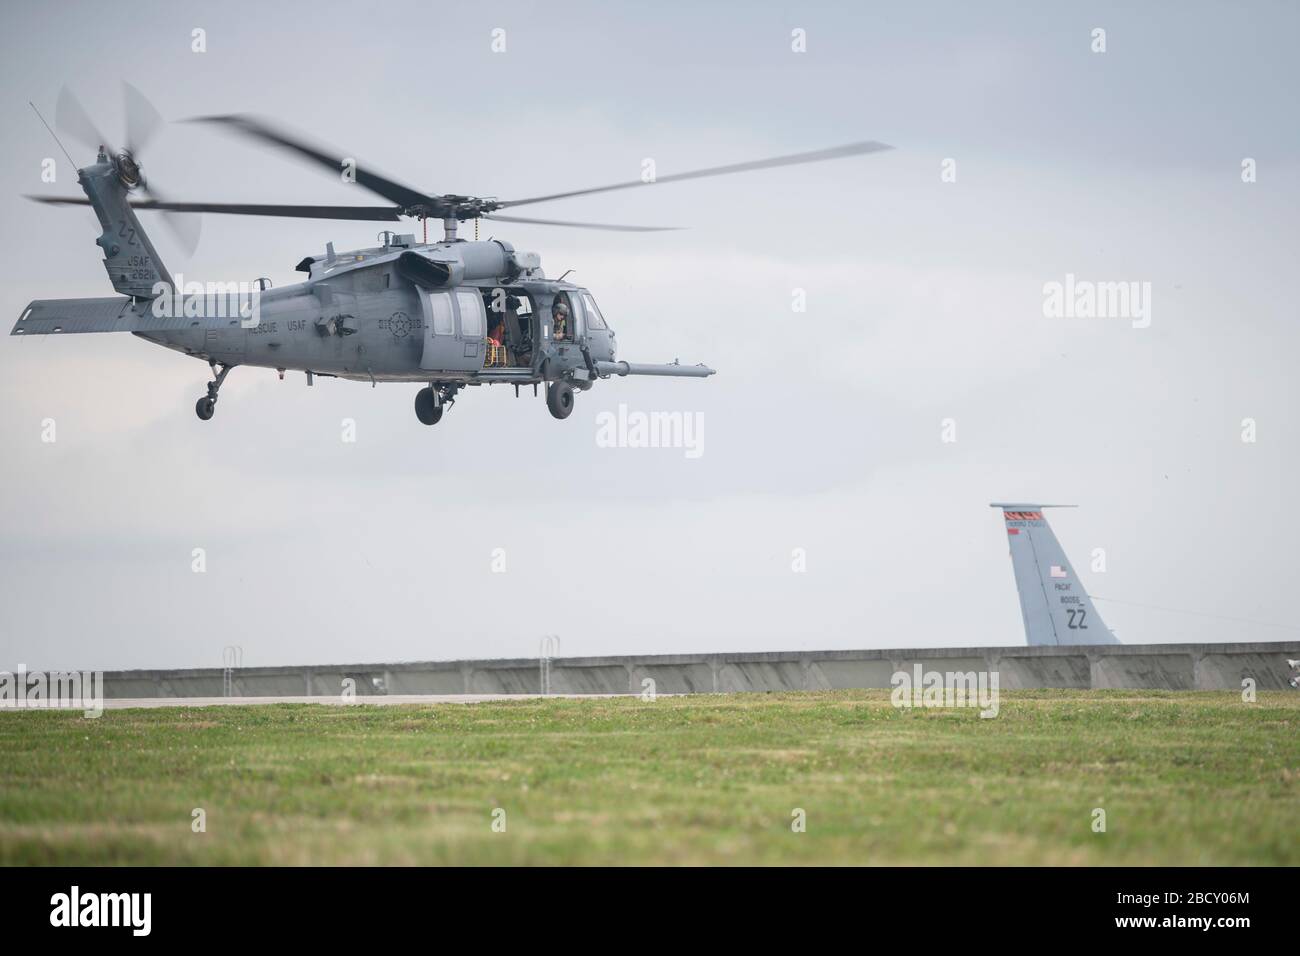 A U.S. Air Force HH-60 Pave Hawk, assigned to the 33rd Rescue Squadron, lifts off for a regular training mission April 3, 2020, at Kadena Air Base, Japan. The HH-60G Pave Hawk, or Precision Avionics Vectoring Equipment, has a hoist that can lift up to 600 pounds during personnel recovery operations. (U.S. Air Force photo by Senior Airman Rhett Isbell) Stock Photo